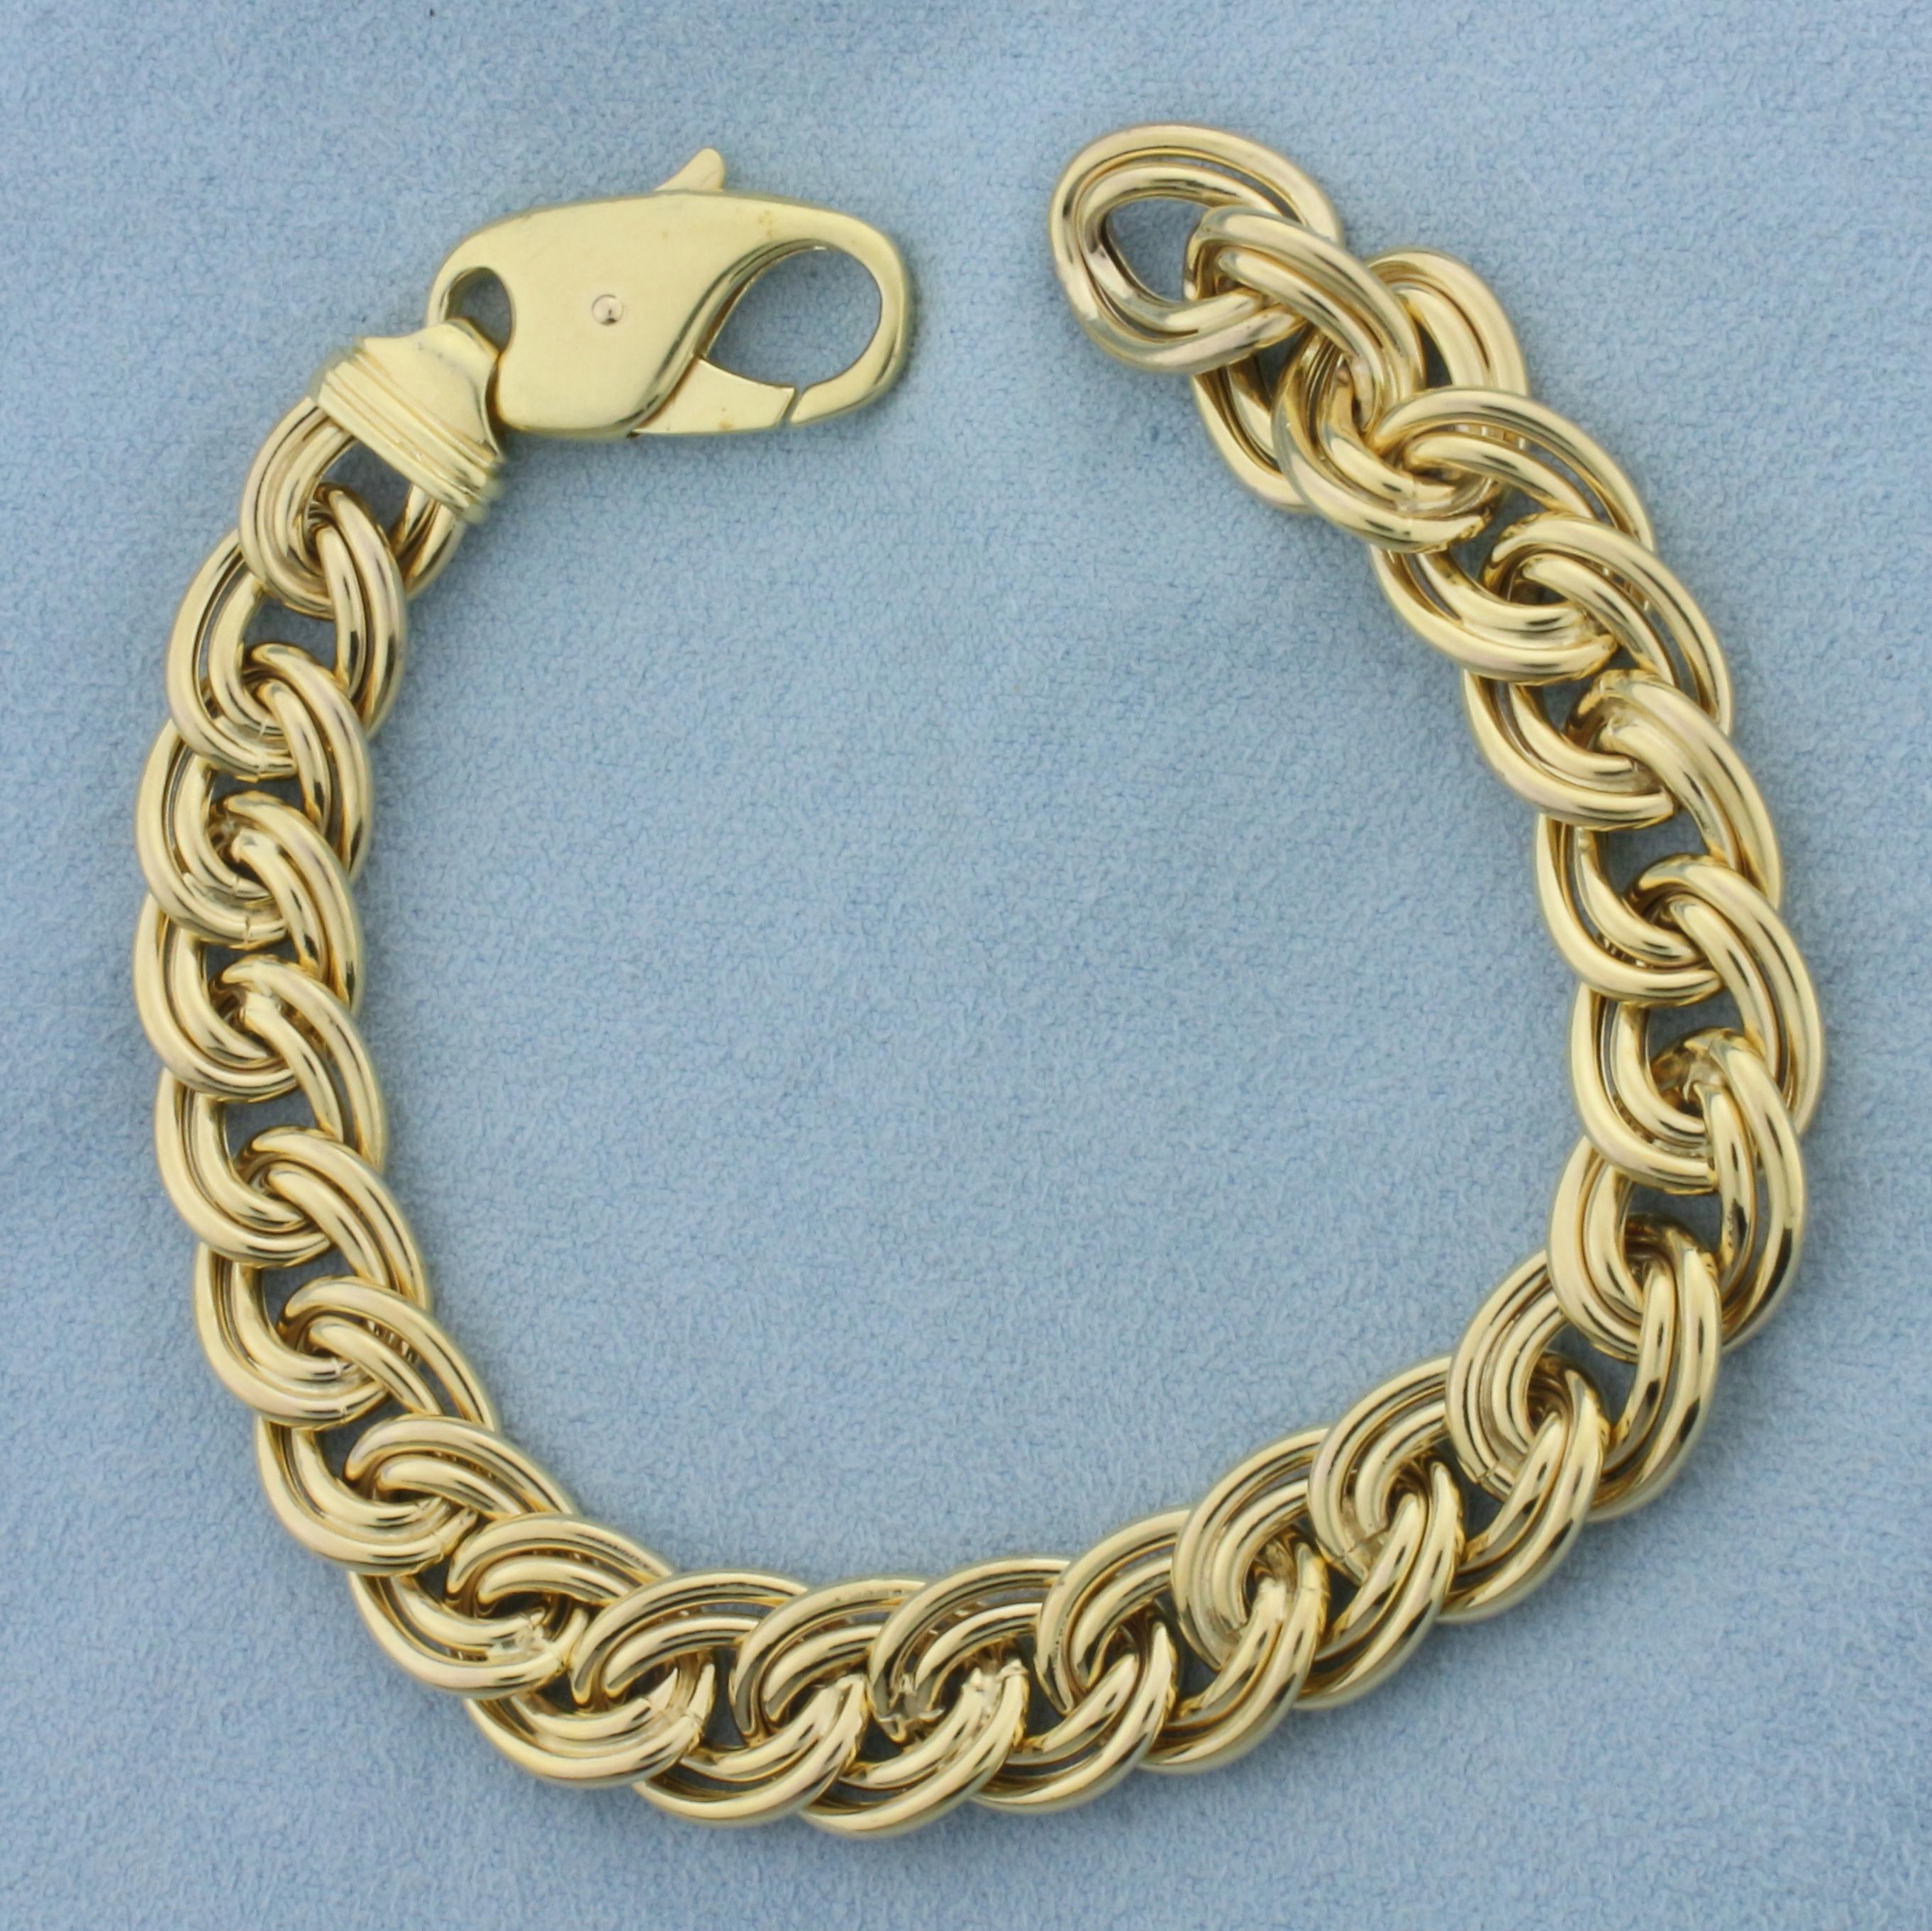 Double Oval Link Bracelet With Oversized Clasp In 14k Yellow Gold